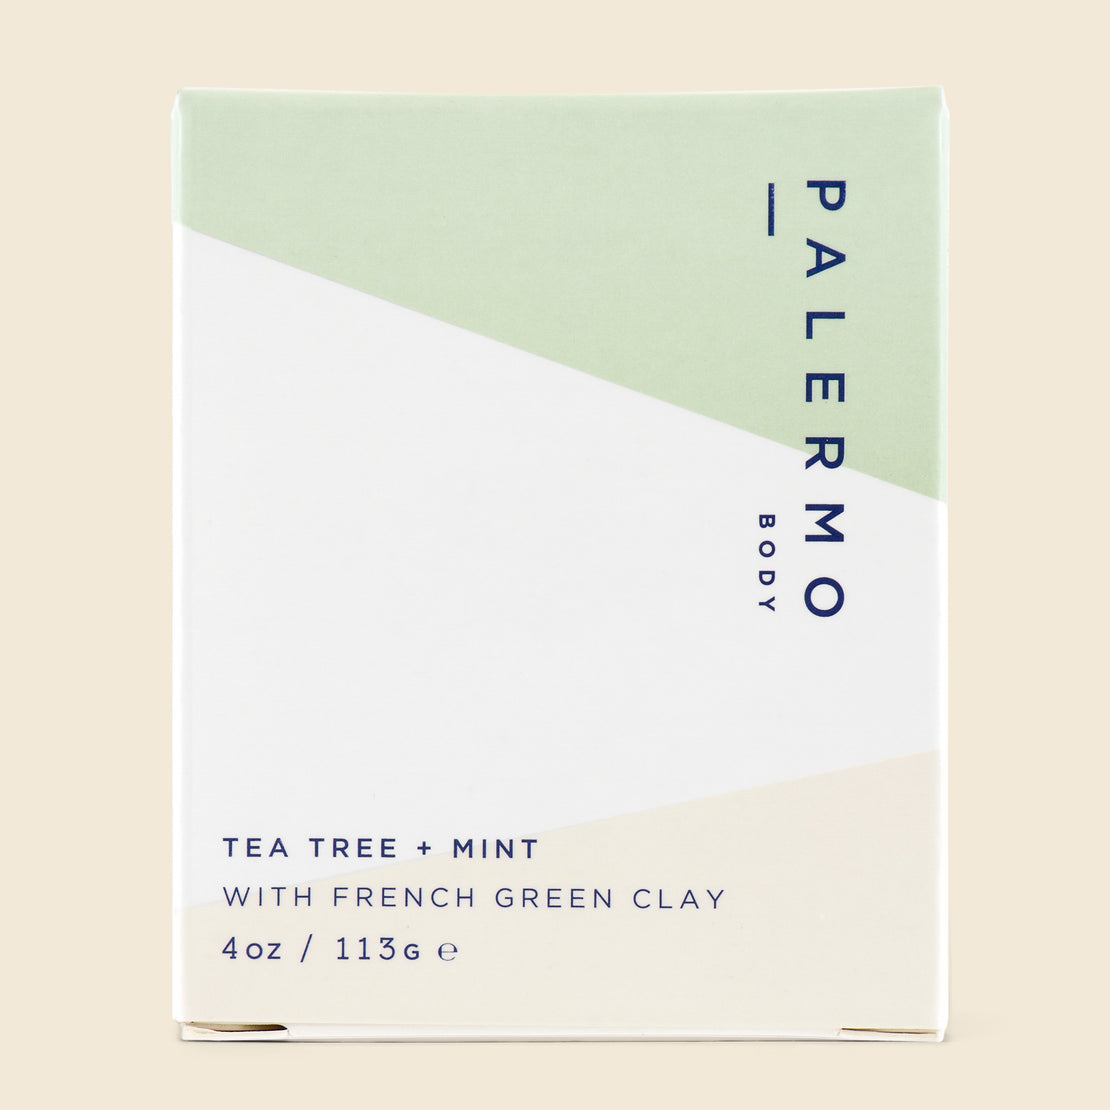 Tea Tree + Mint with French Green Clay Soap - Palermo Body - STAG Provisions - W - Chemist - Skin Care